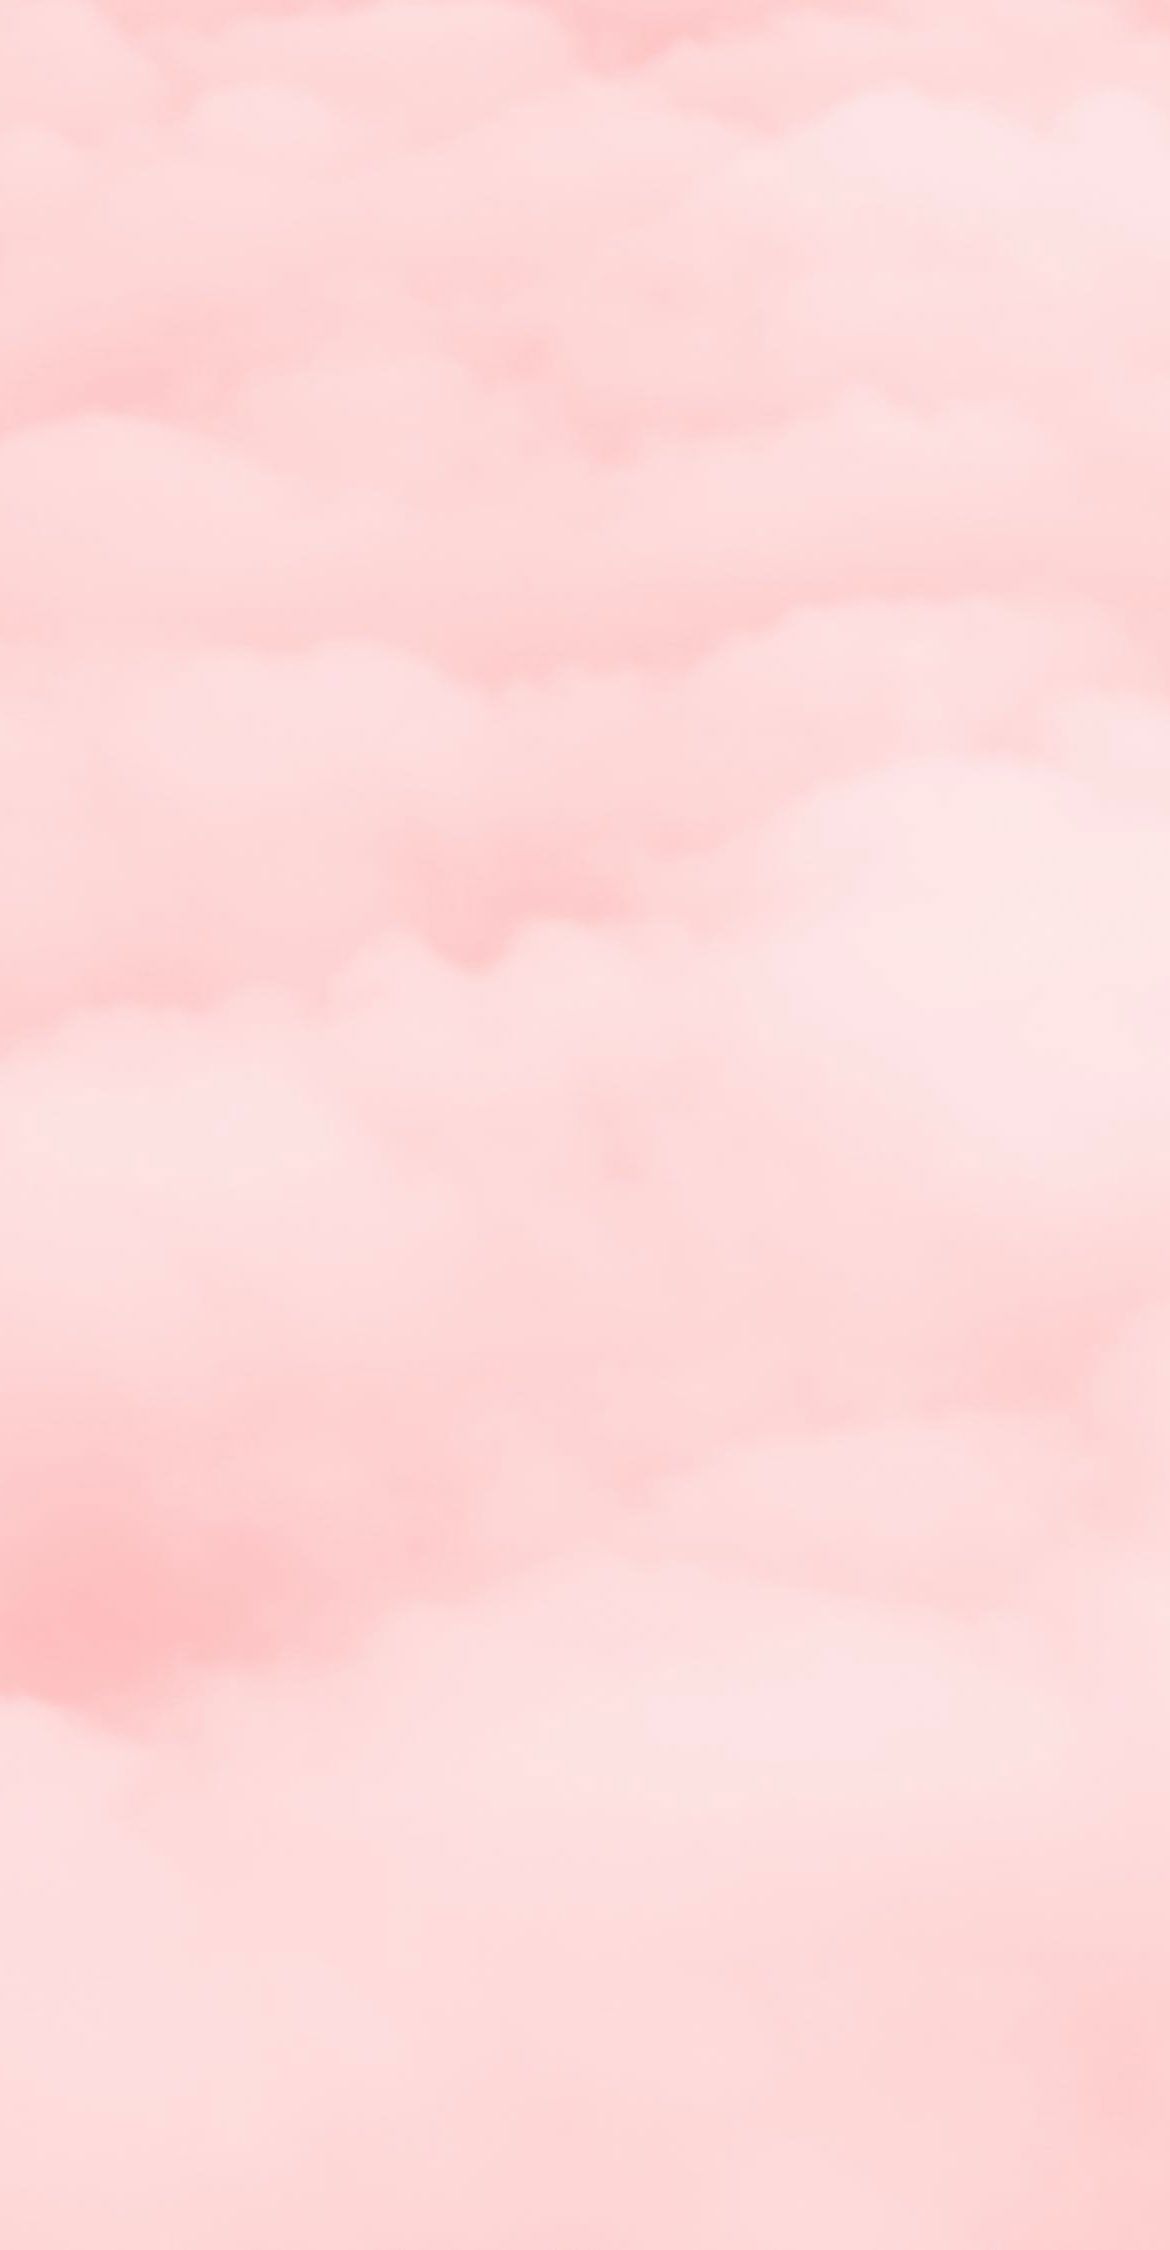 A pink sky with clouds and airplanes - Pink, light pink, pastel pink, soft pink, pink phone, cloud, sky